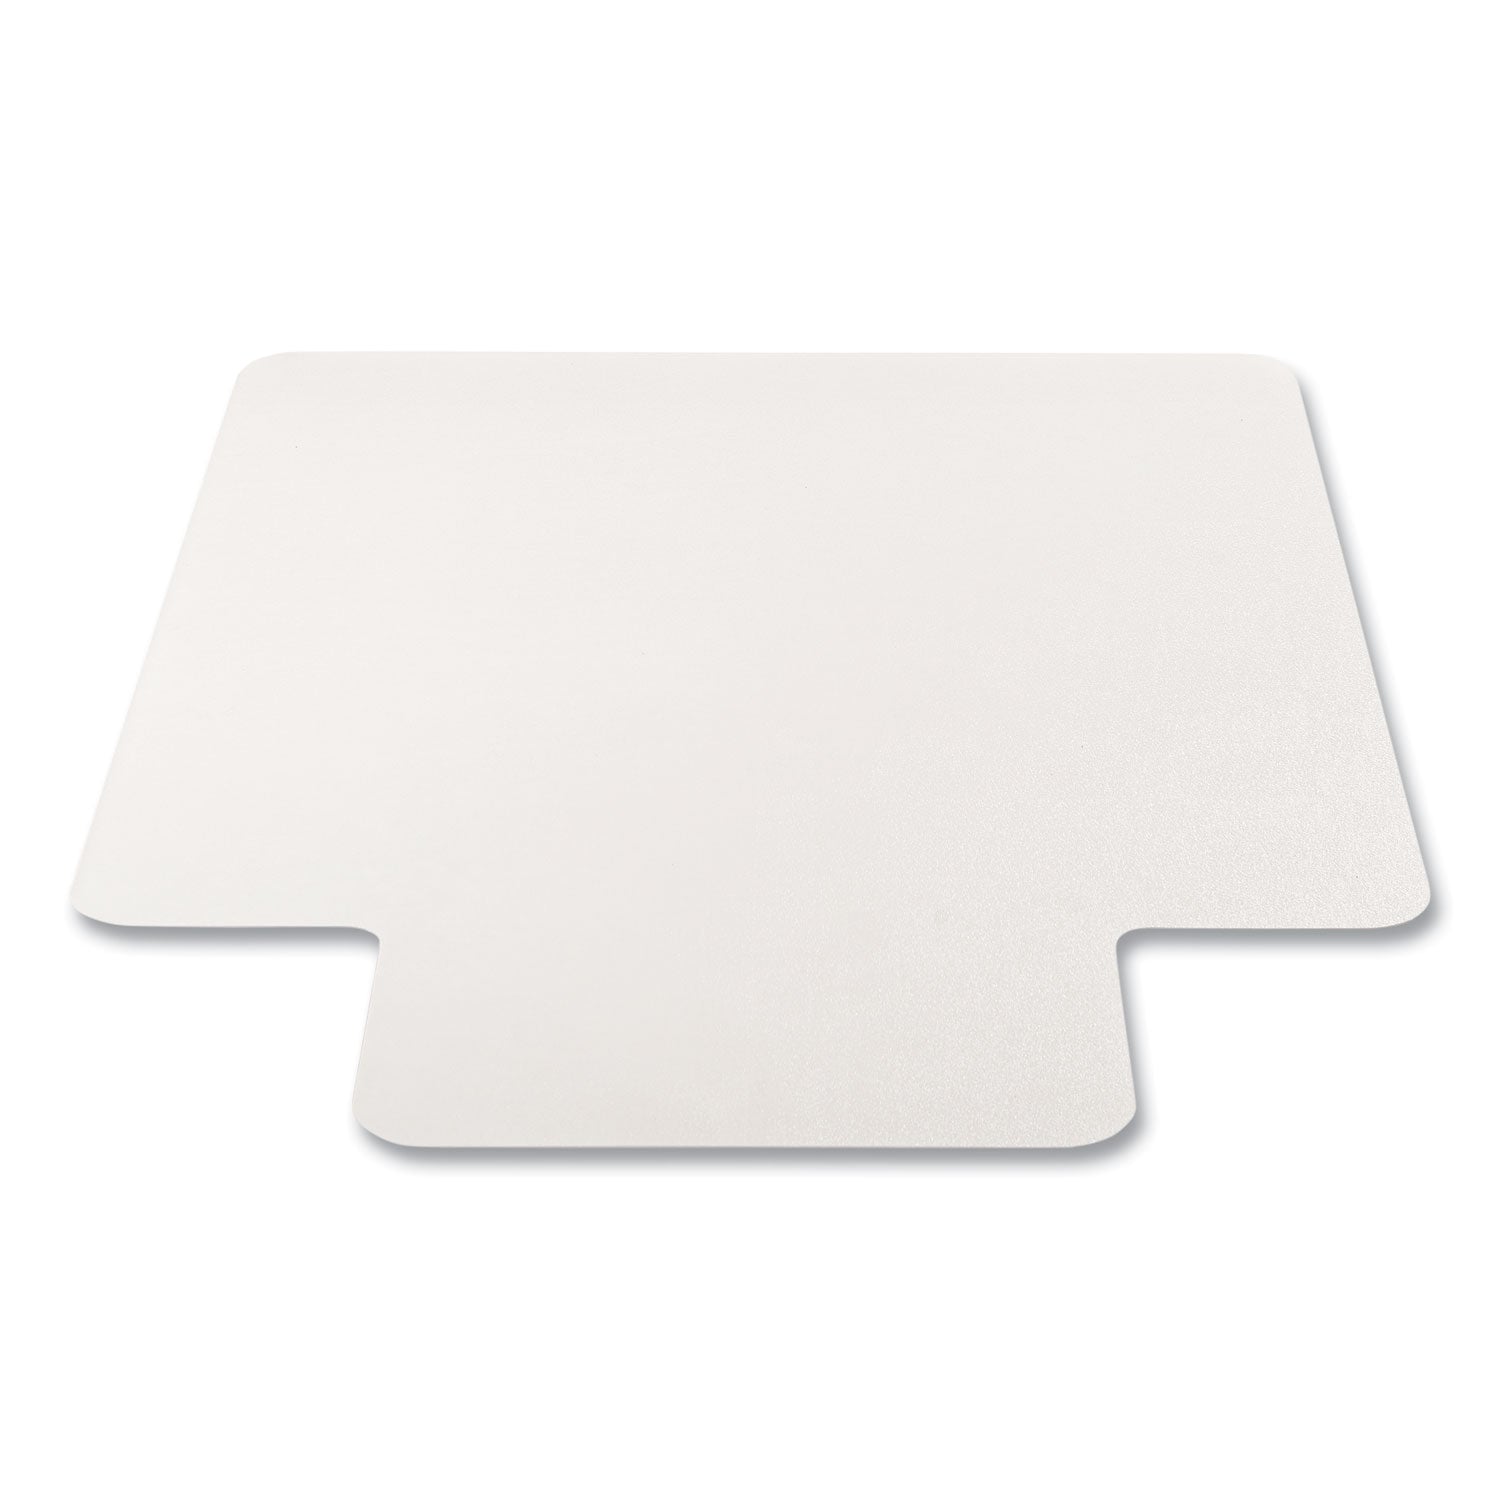 economat-antimicrobial-chair-mat-lipped-36-x-48-clear-ships-in-4-6-business-days_defcm2e112amcom - 2